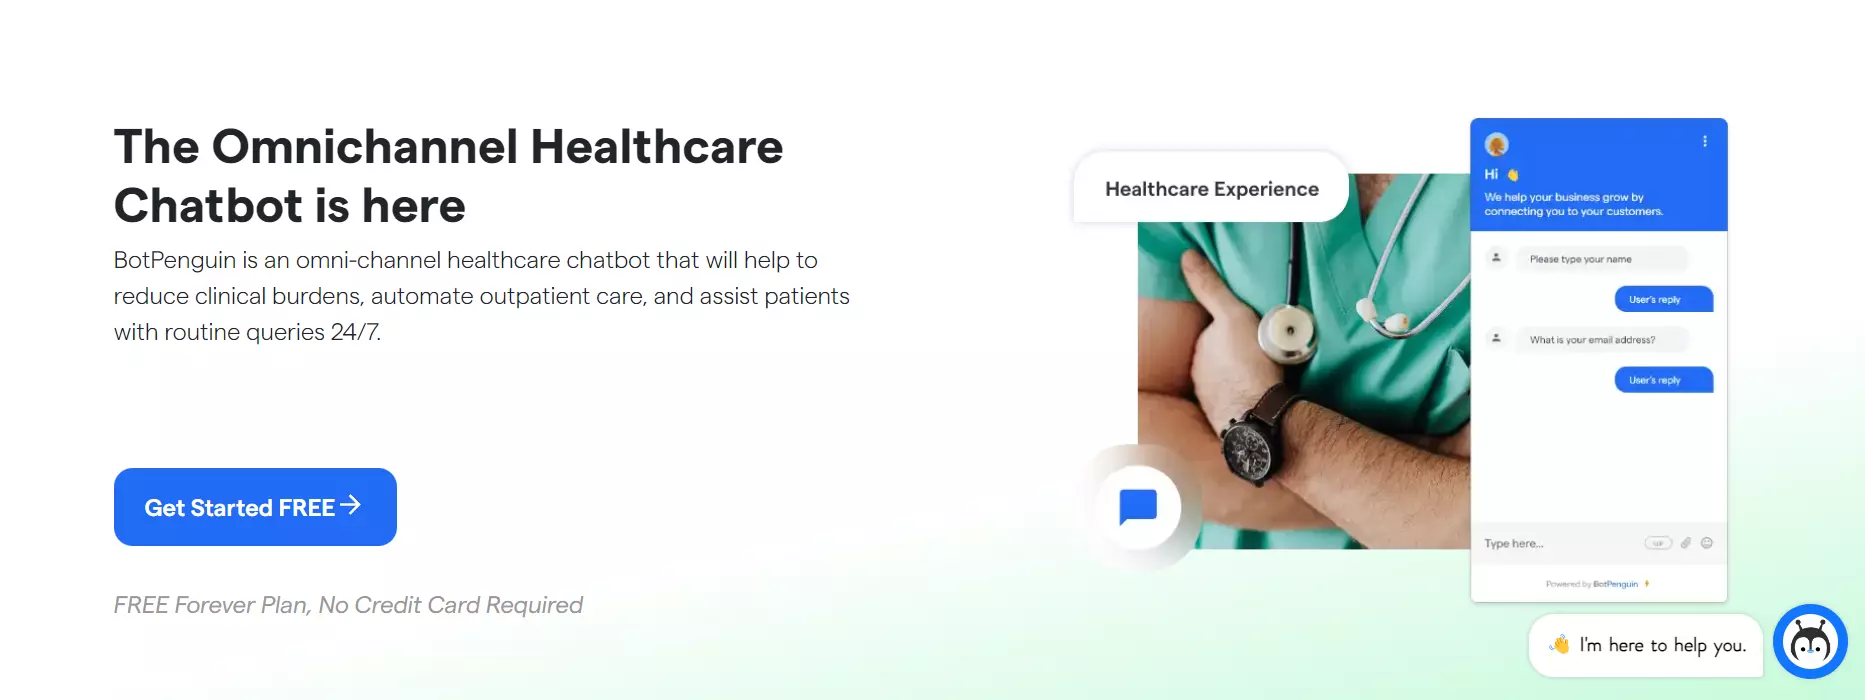 The Future of Chatbots in Healthcare